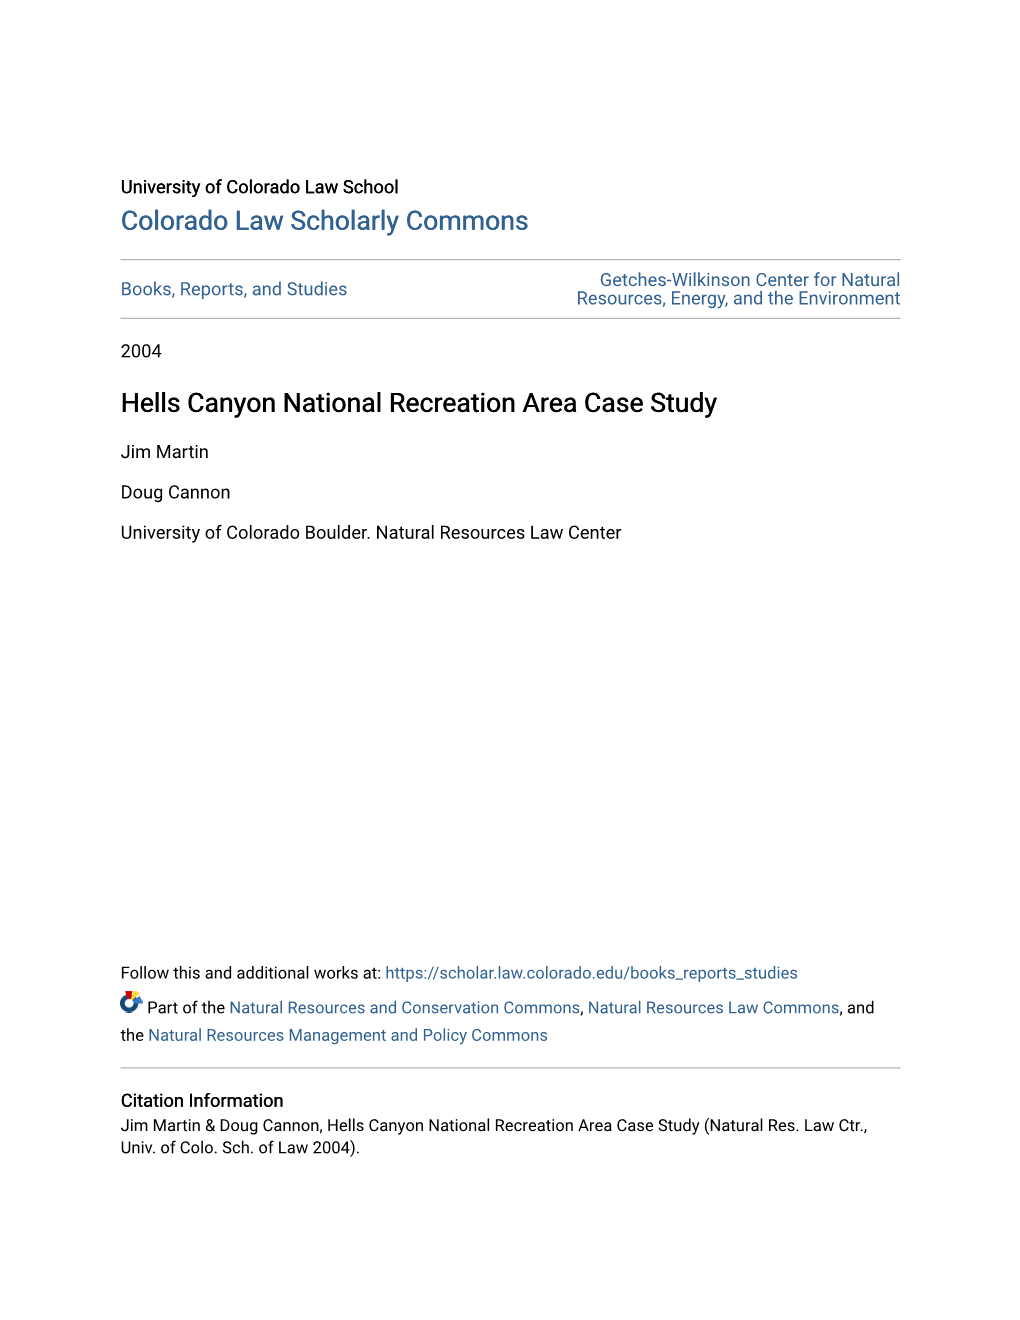 Hells Canyon National Recreation Area Case Study